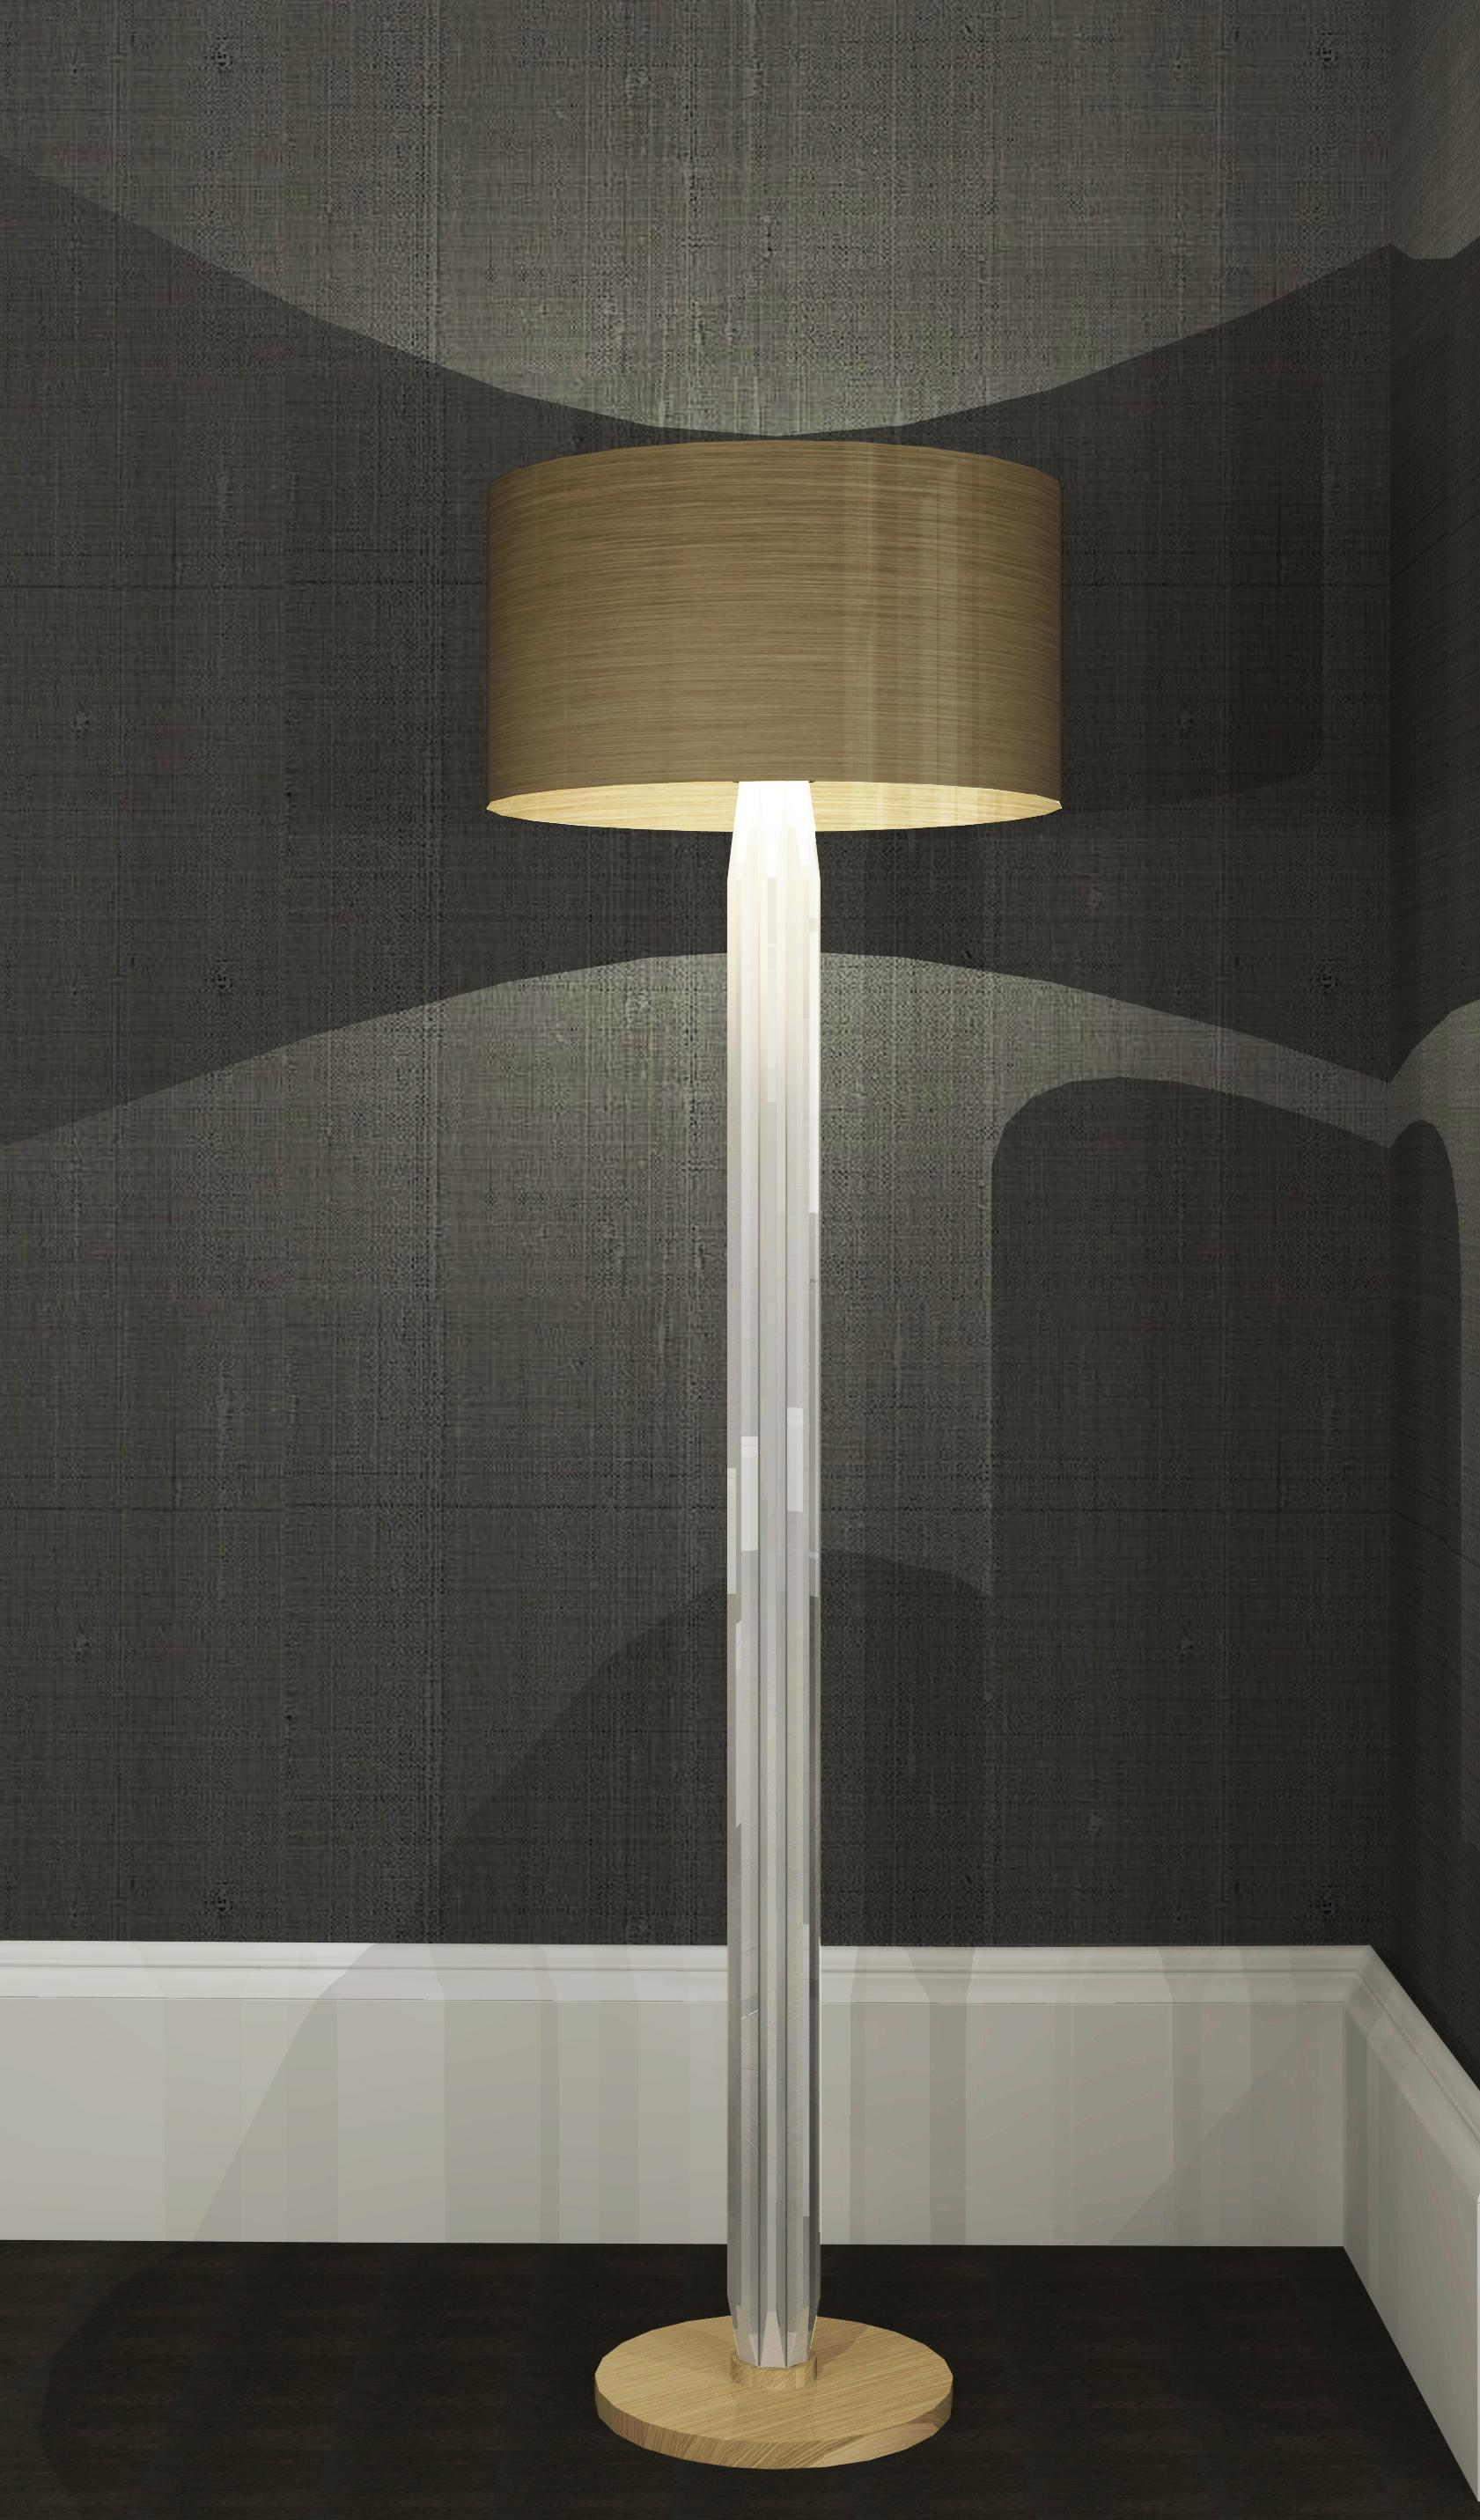 This floor lamp uses a mix of bold materials, brushed brass band and over-sized crystal elements, to give impact whilst remaining clean and classic. The designs cool, clean, beveled-edge crystals give a beautiful reflection and transparency, whilst